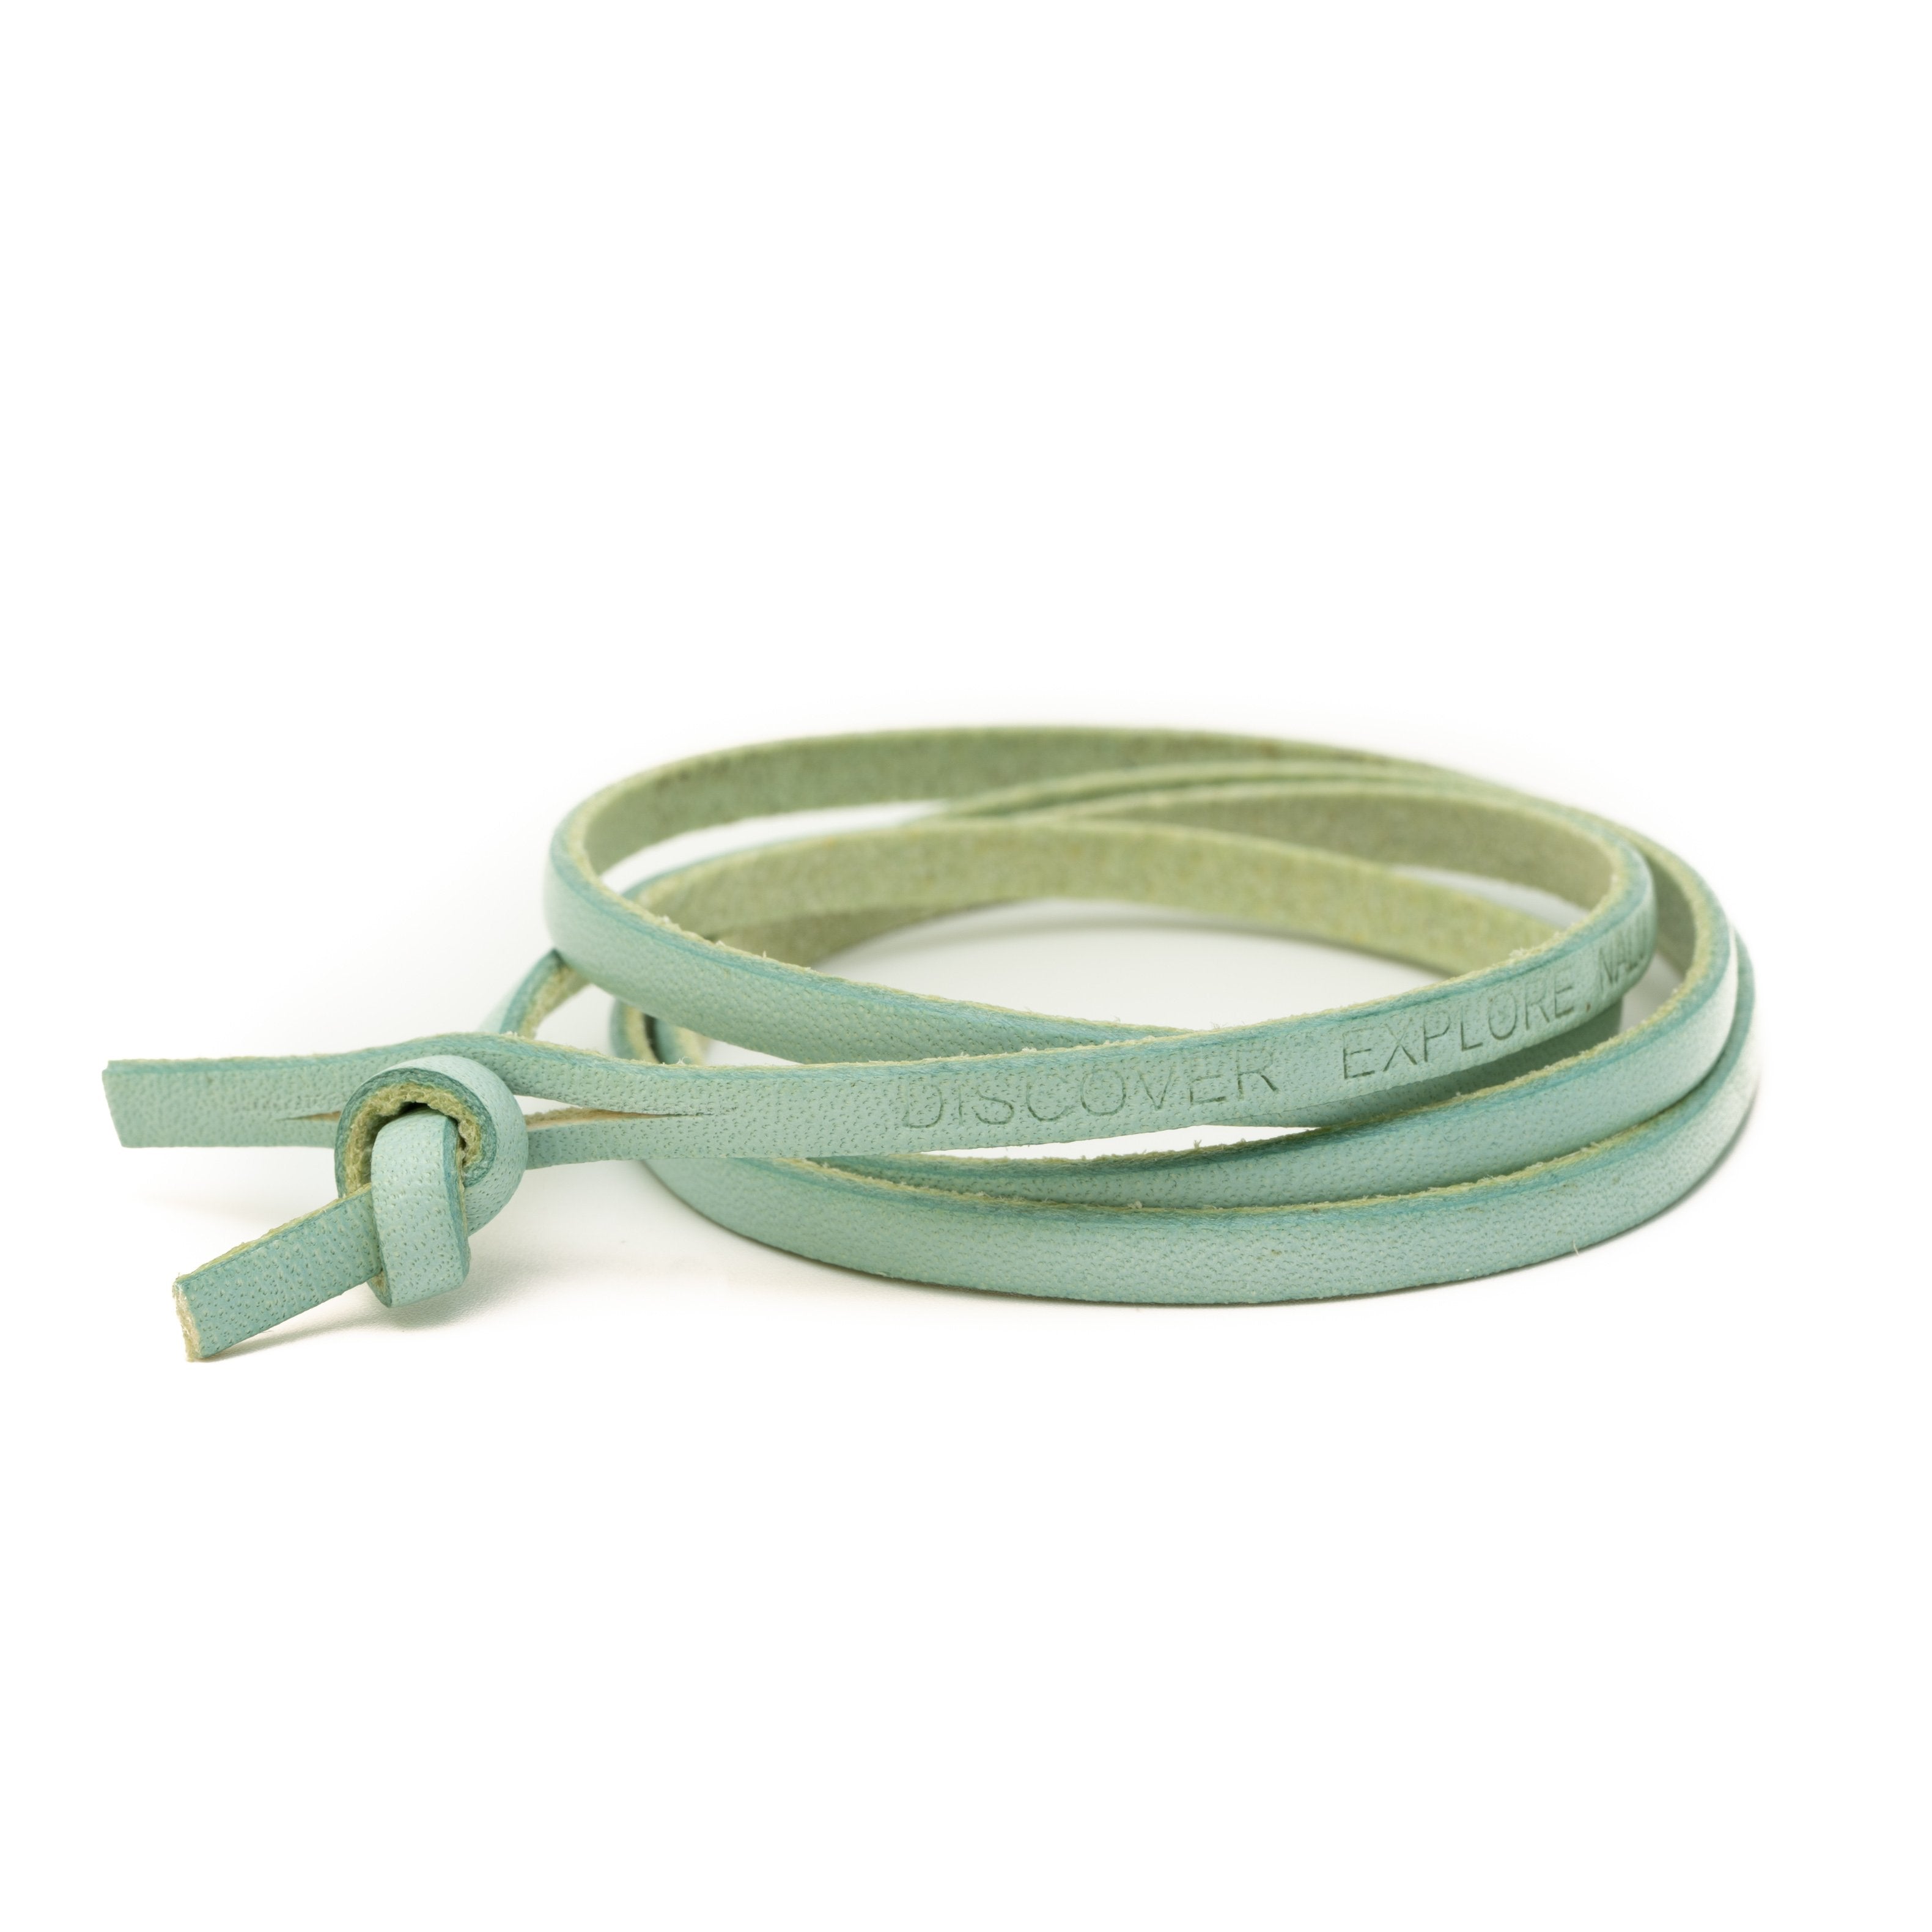 Pale aqua leather wrap bracelet designed to be worn with our surf sea glass beads.